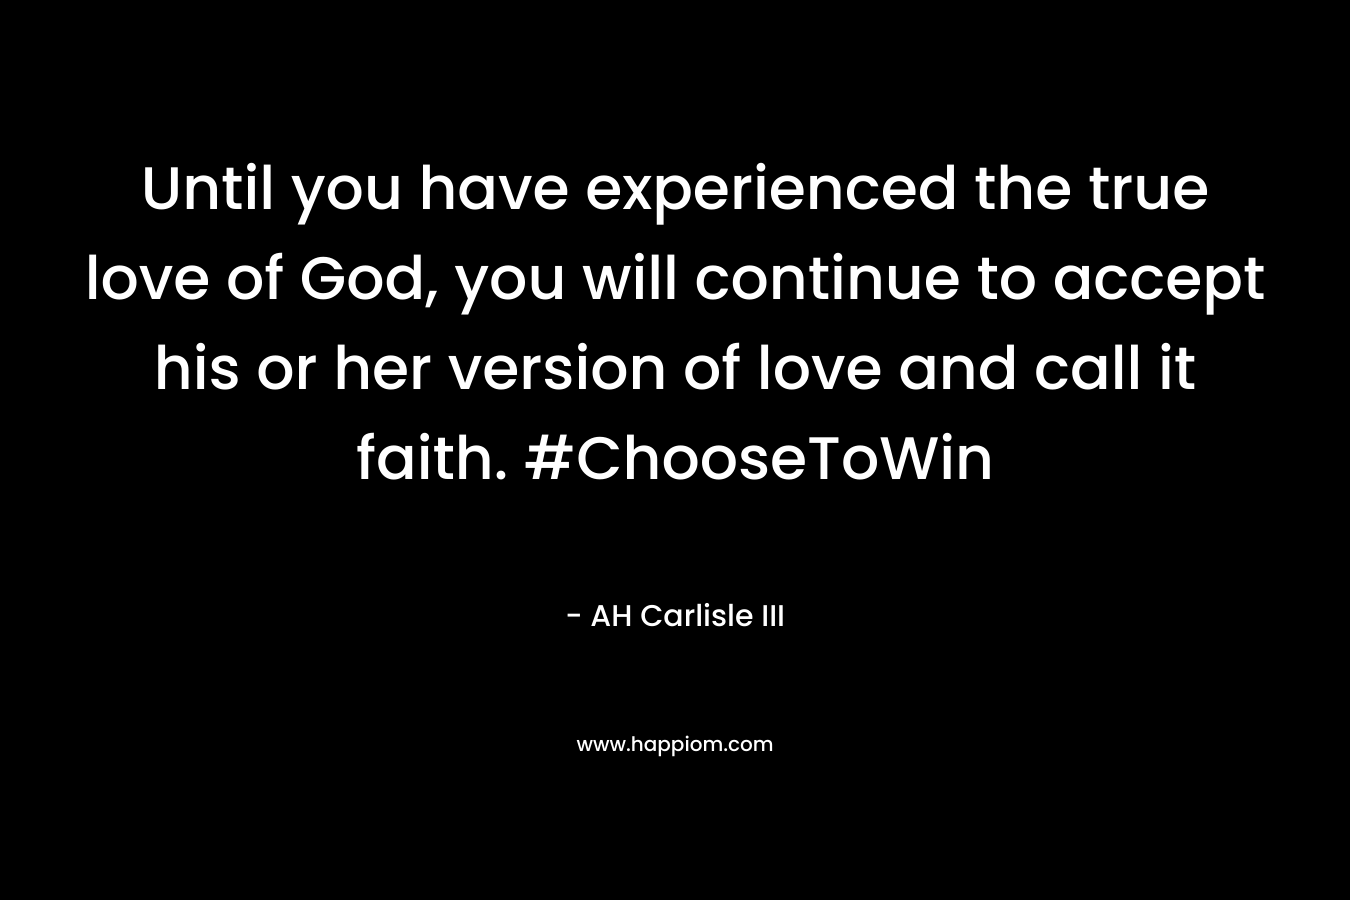 Until you have experienced the true love of God, you will continue to accept his or her version of love and call it faith. #ChooseToWin – AH Carlisle III